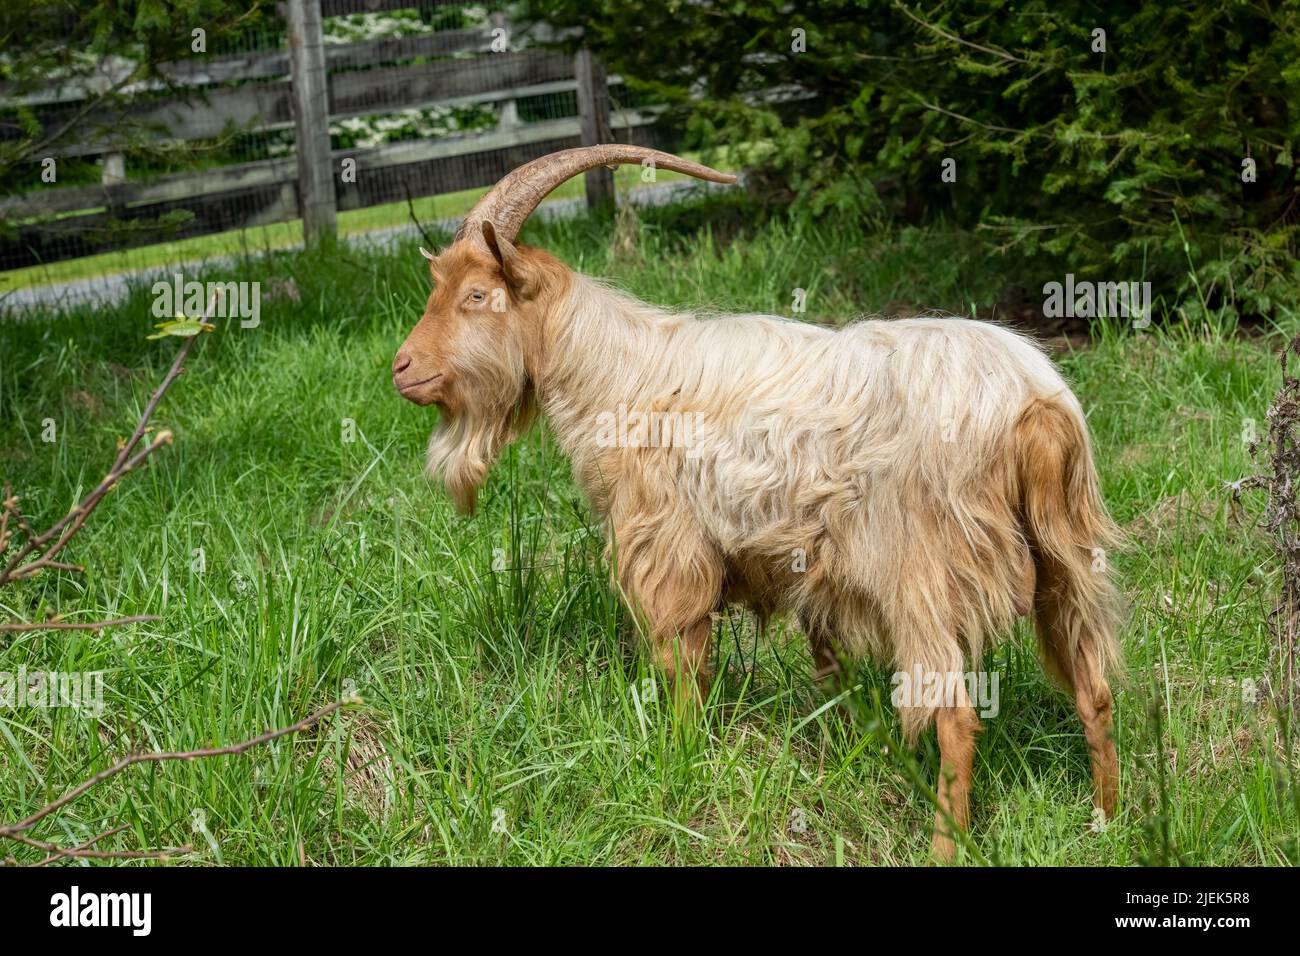 Issaquah, Washington, USA.  Portrait of a rare heritage breed, Golden Gurnsey billy goat, standing in a meadow Stock Photo